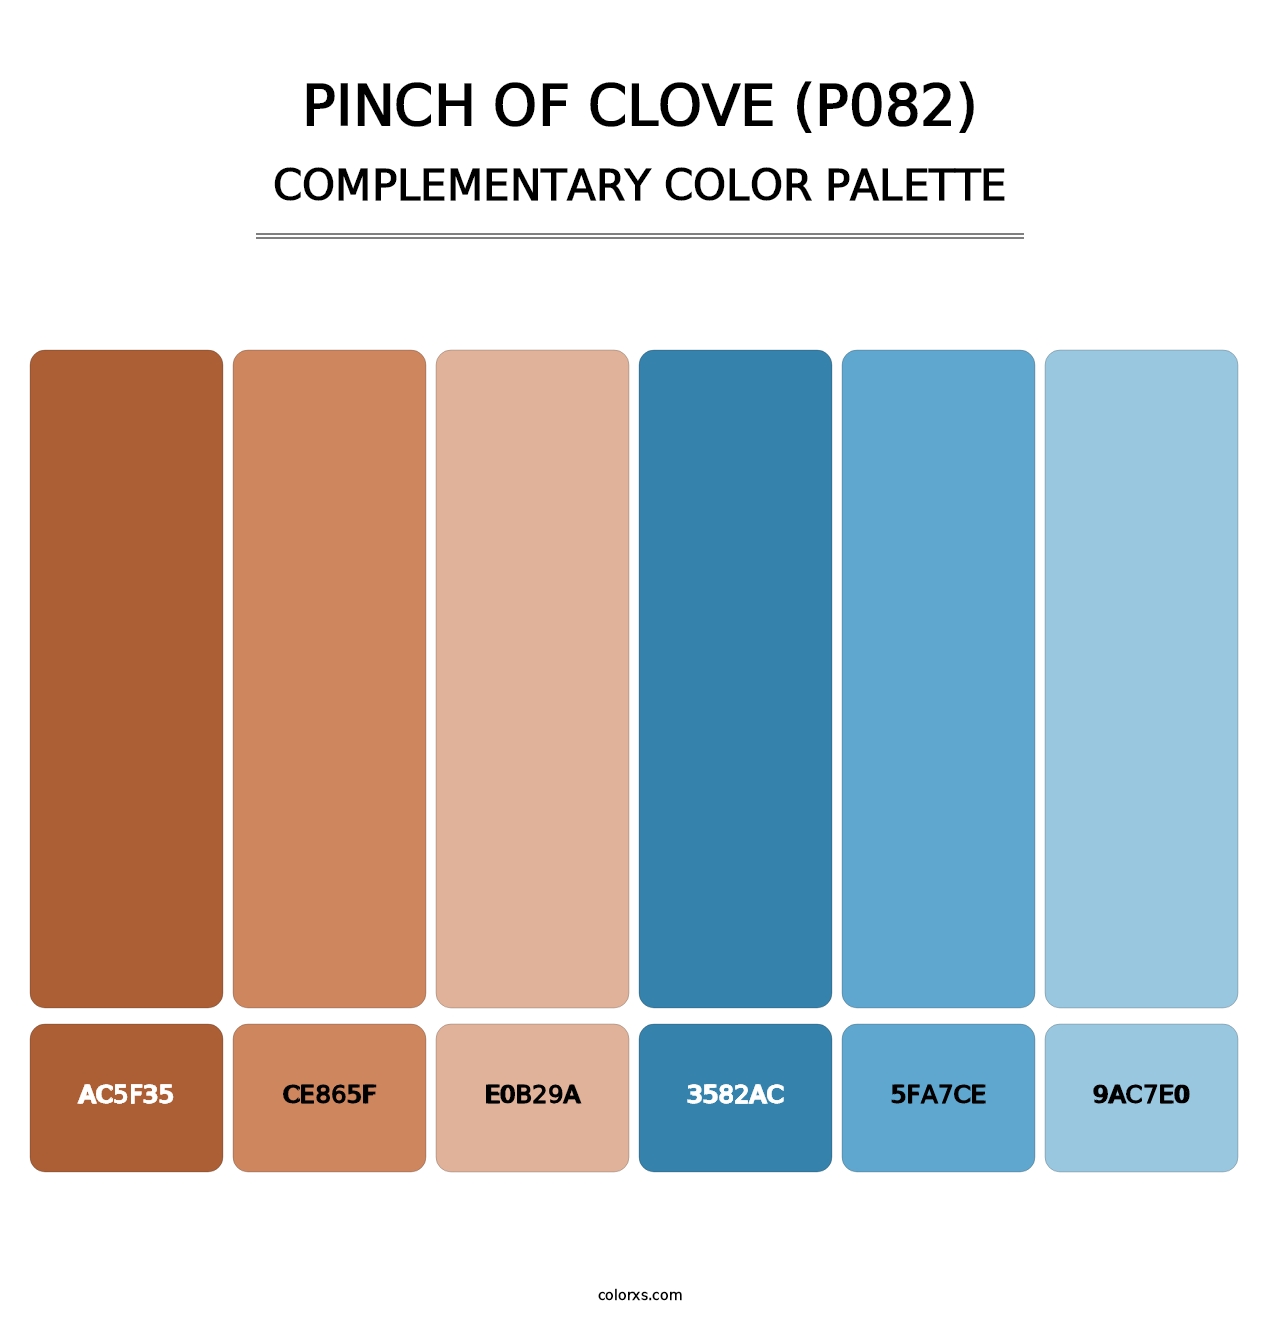 Pinch of Clove (P082) - Complementary Color Palette